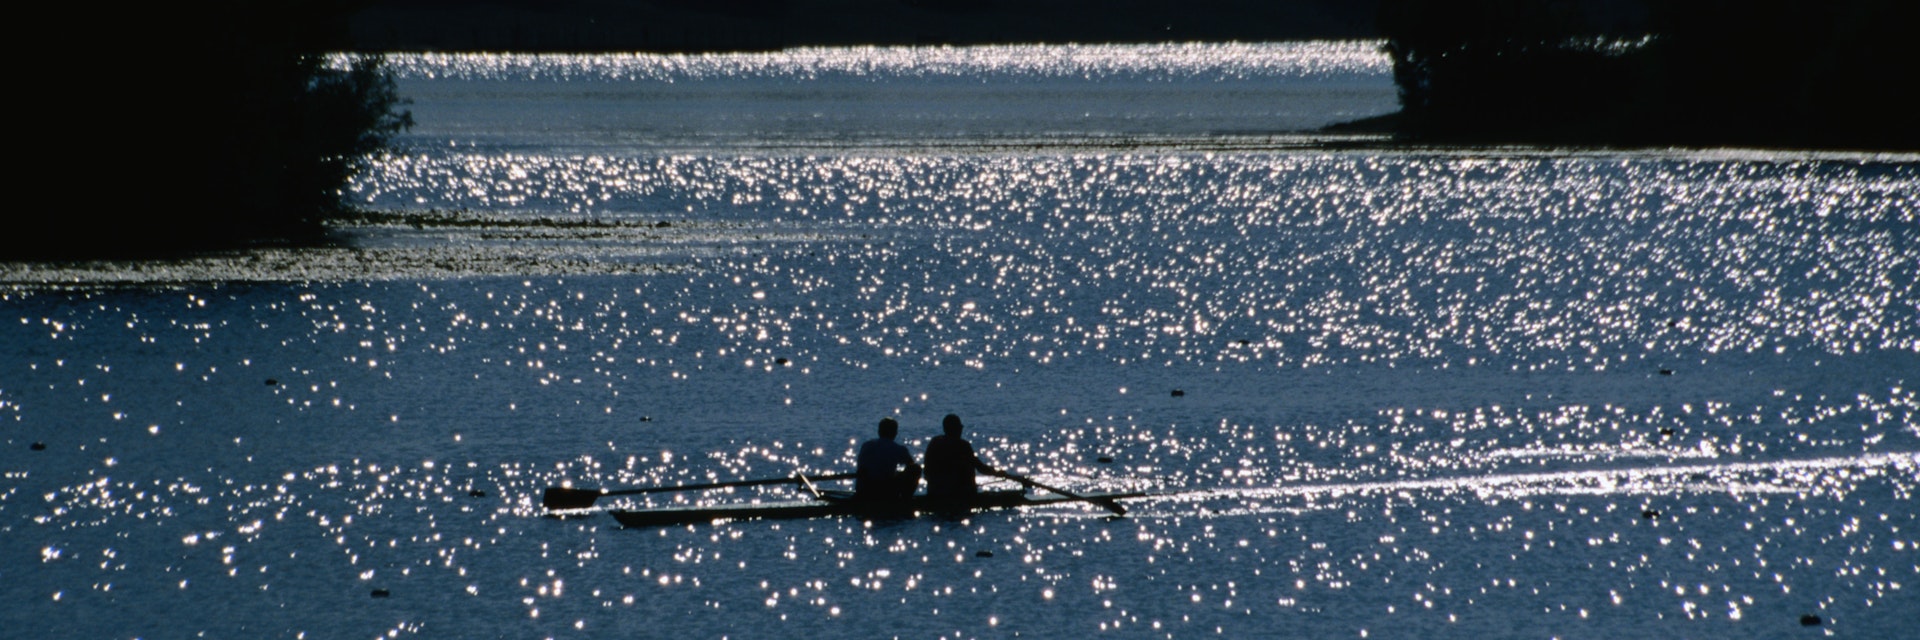 Two rowers propelling their craft through the sun-dappled waters of Jarun Lake.